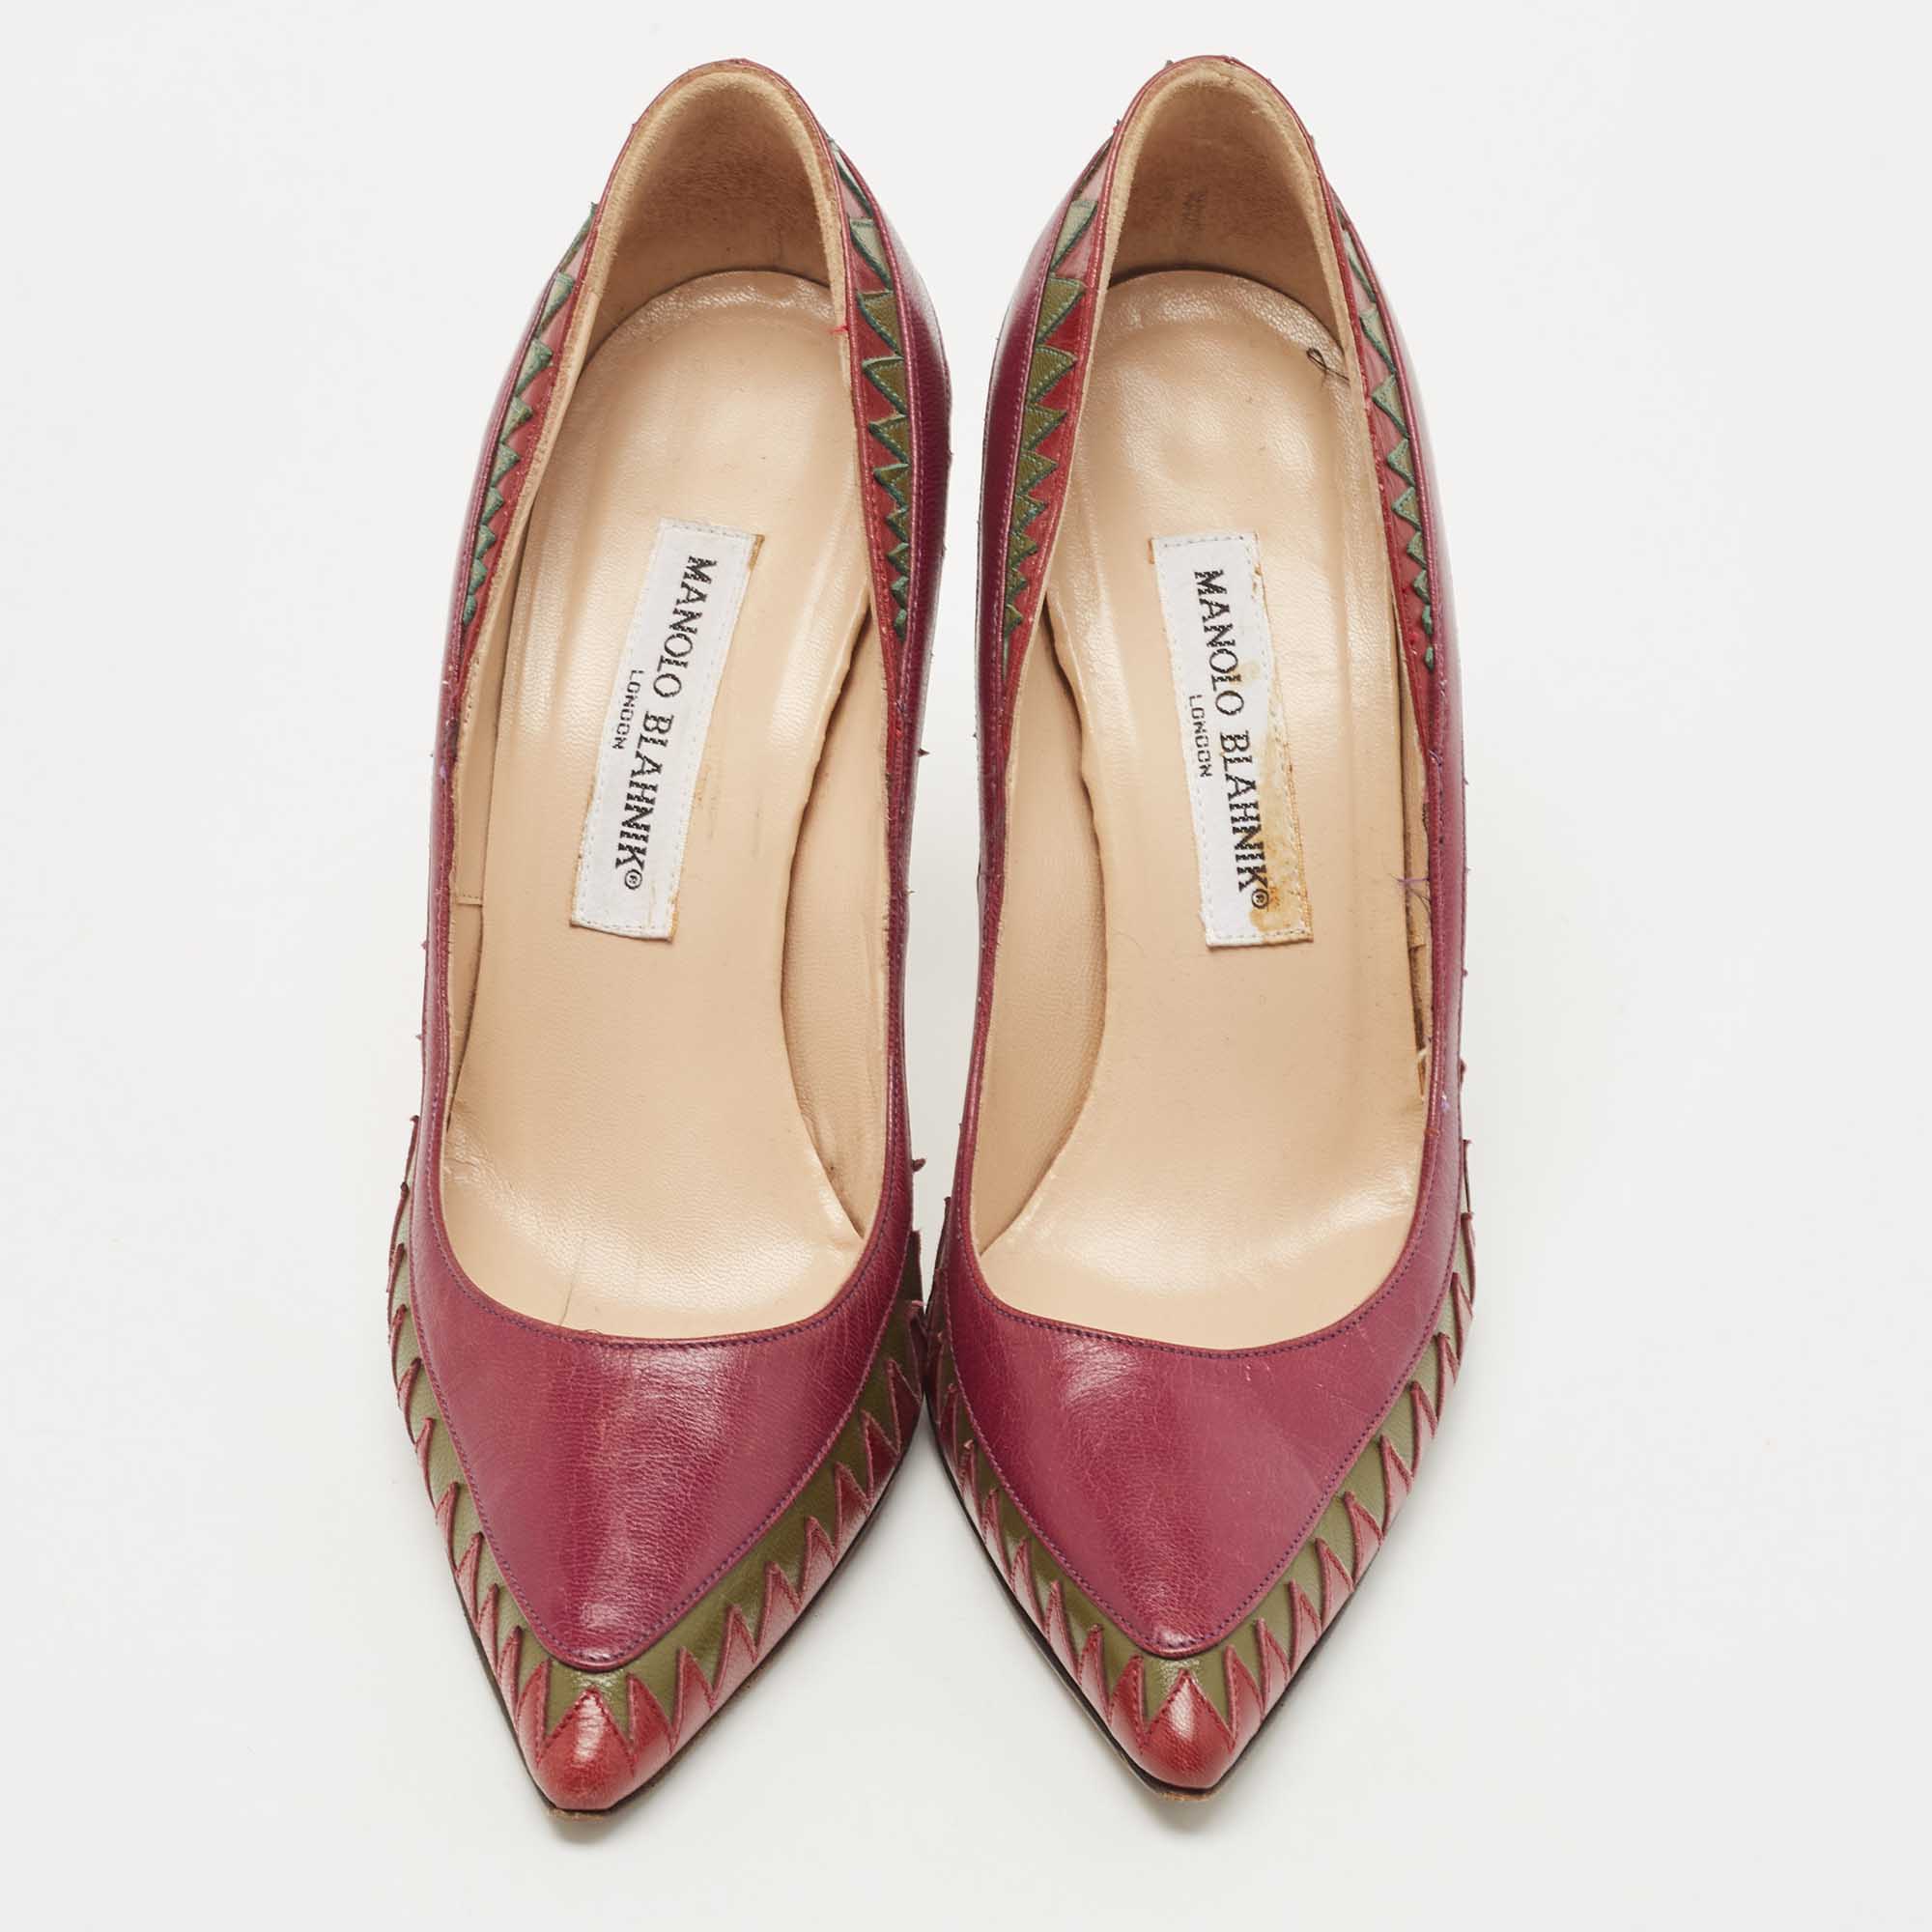 Manolo Blahnik Tricolor Leather Pointed Toe Pumps Size 37.5